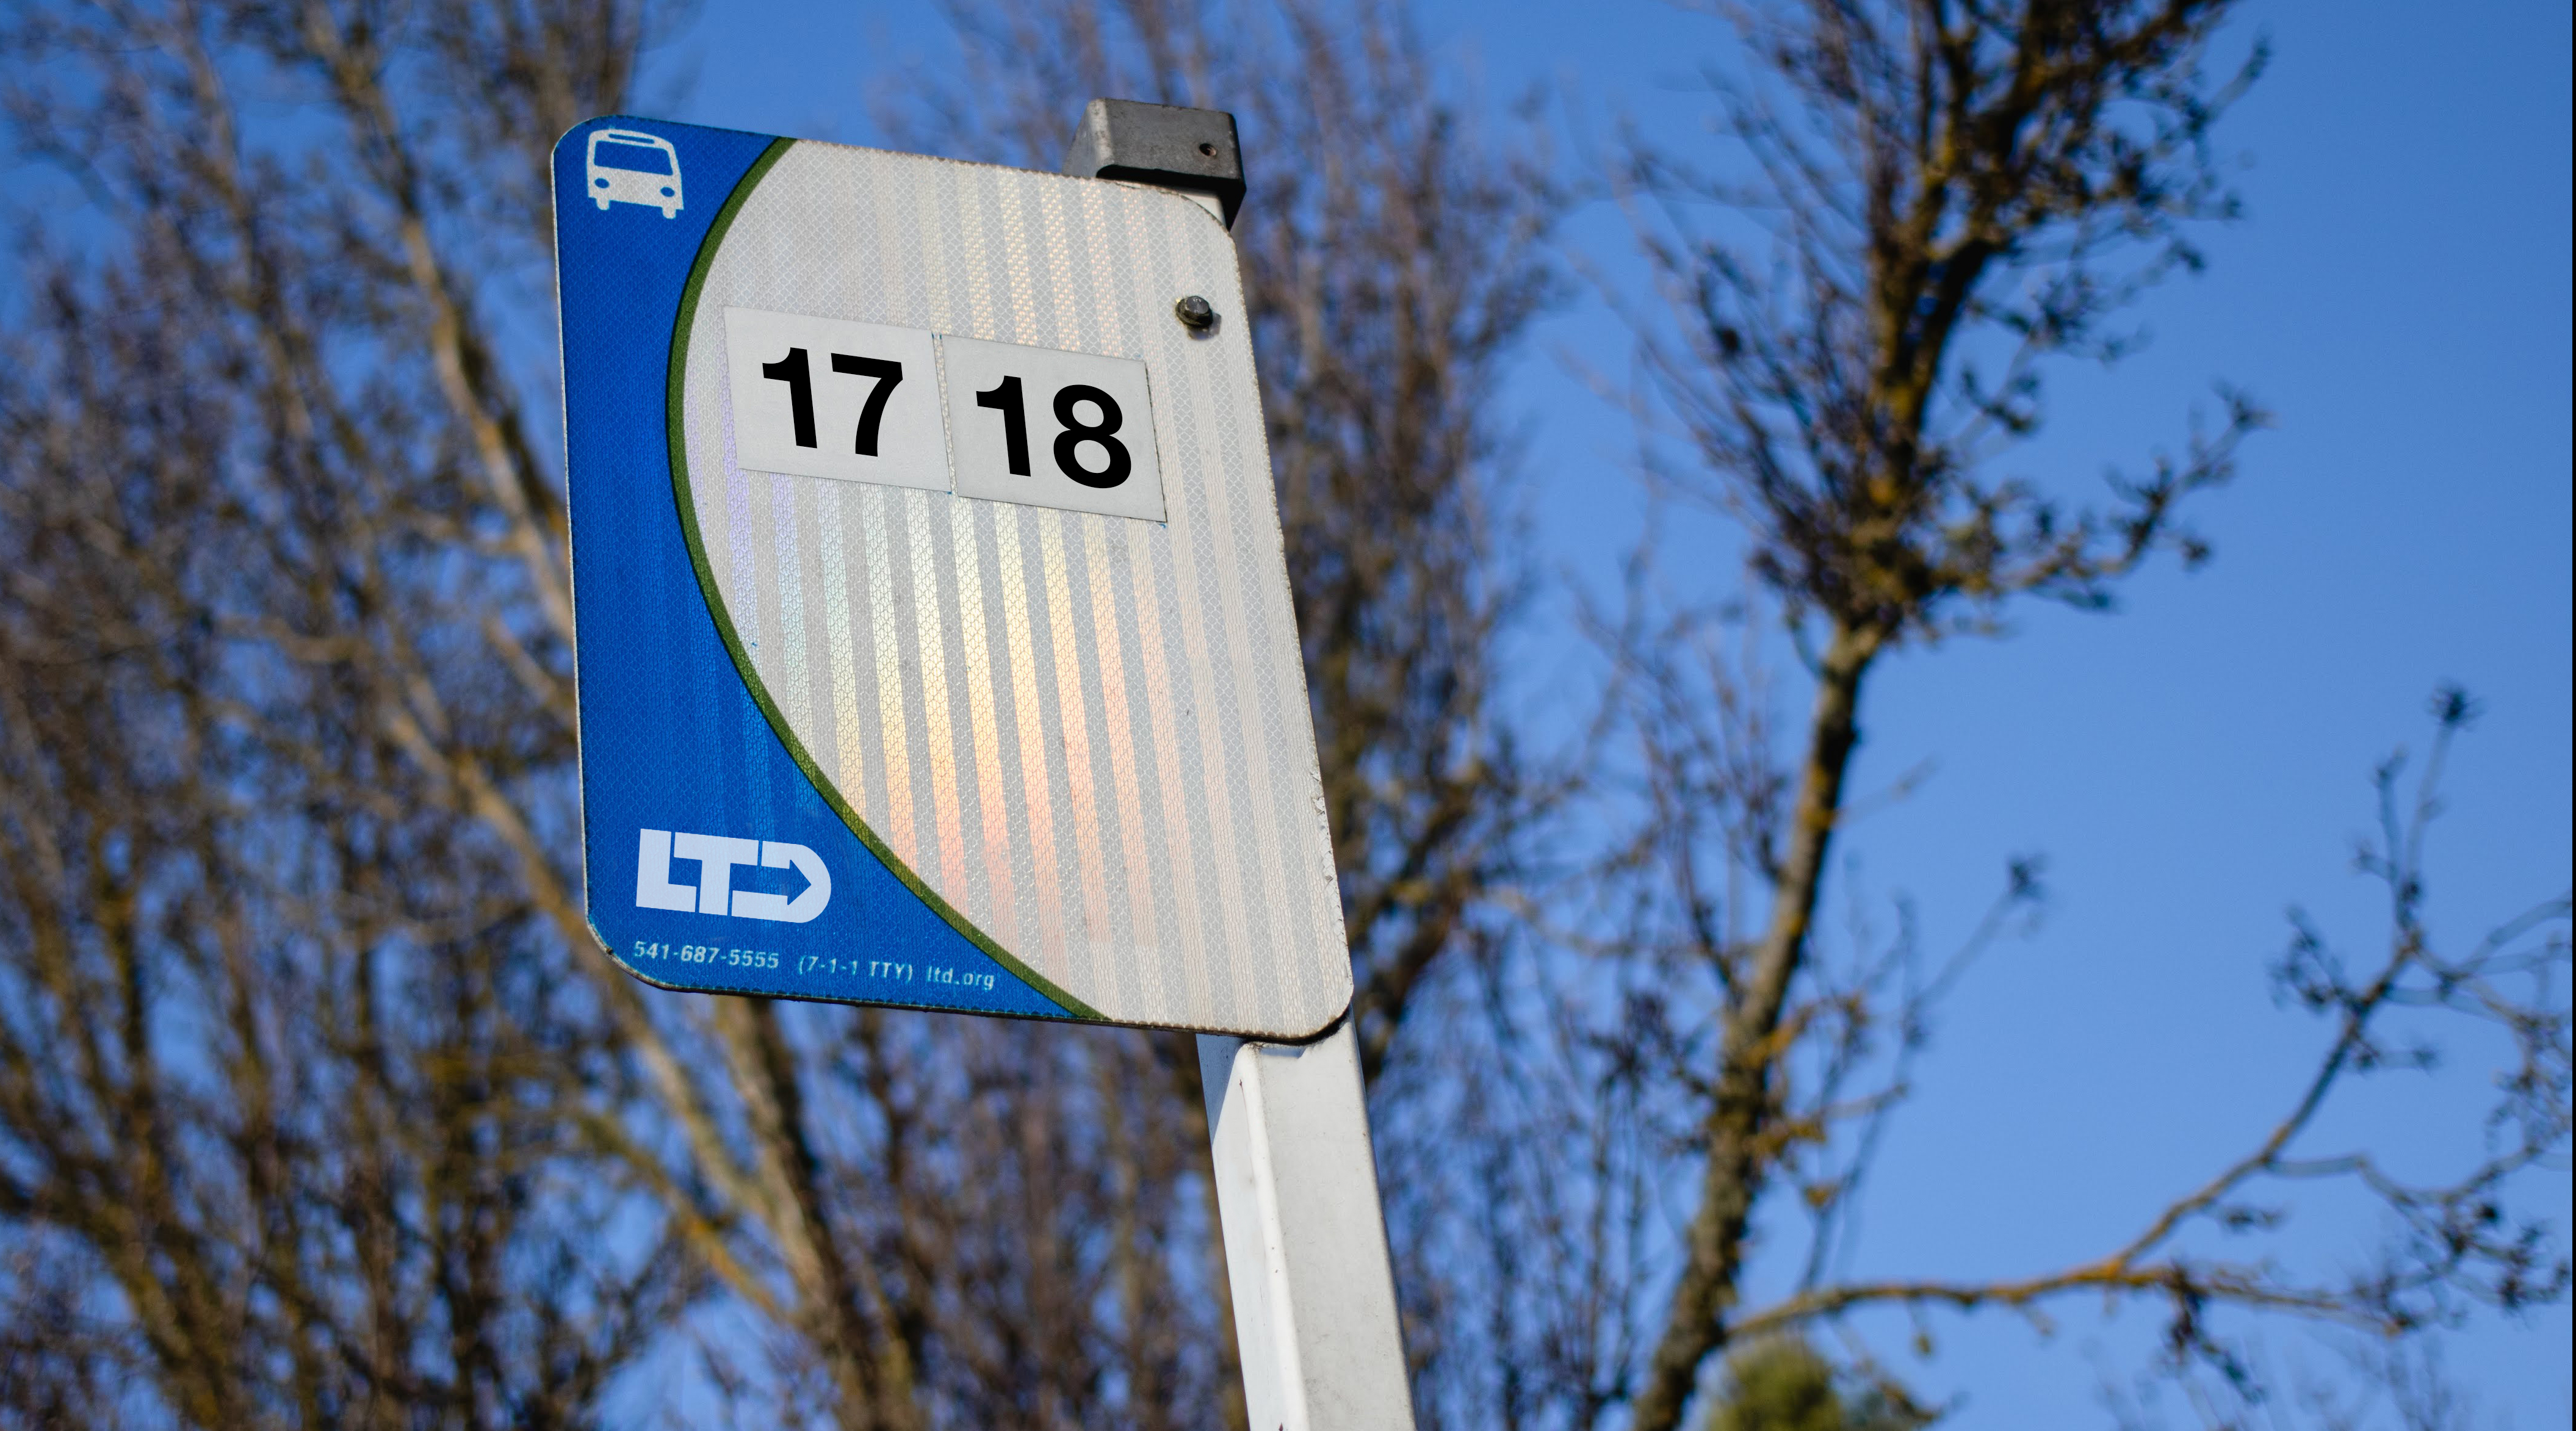 A Lane Transit District bus stop sign on a white post. Trees in the background with no leaves on a clear blue skied day.